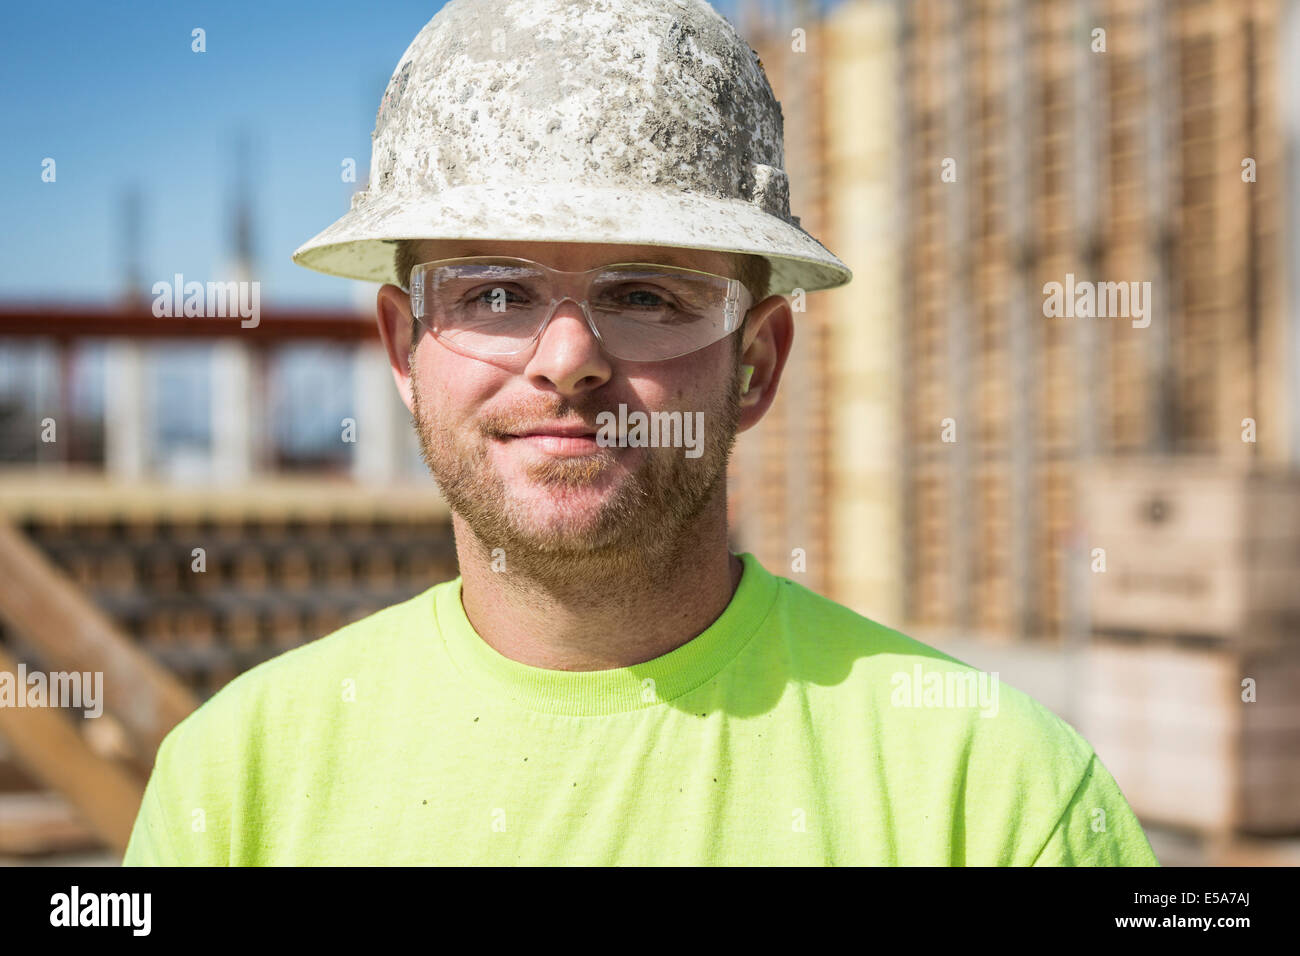 Worker smiling on construction site Stock Photo